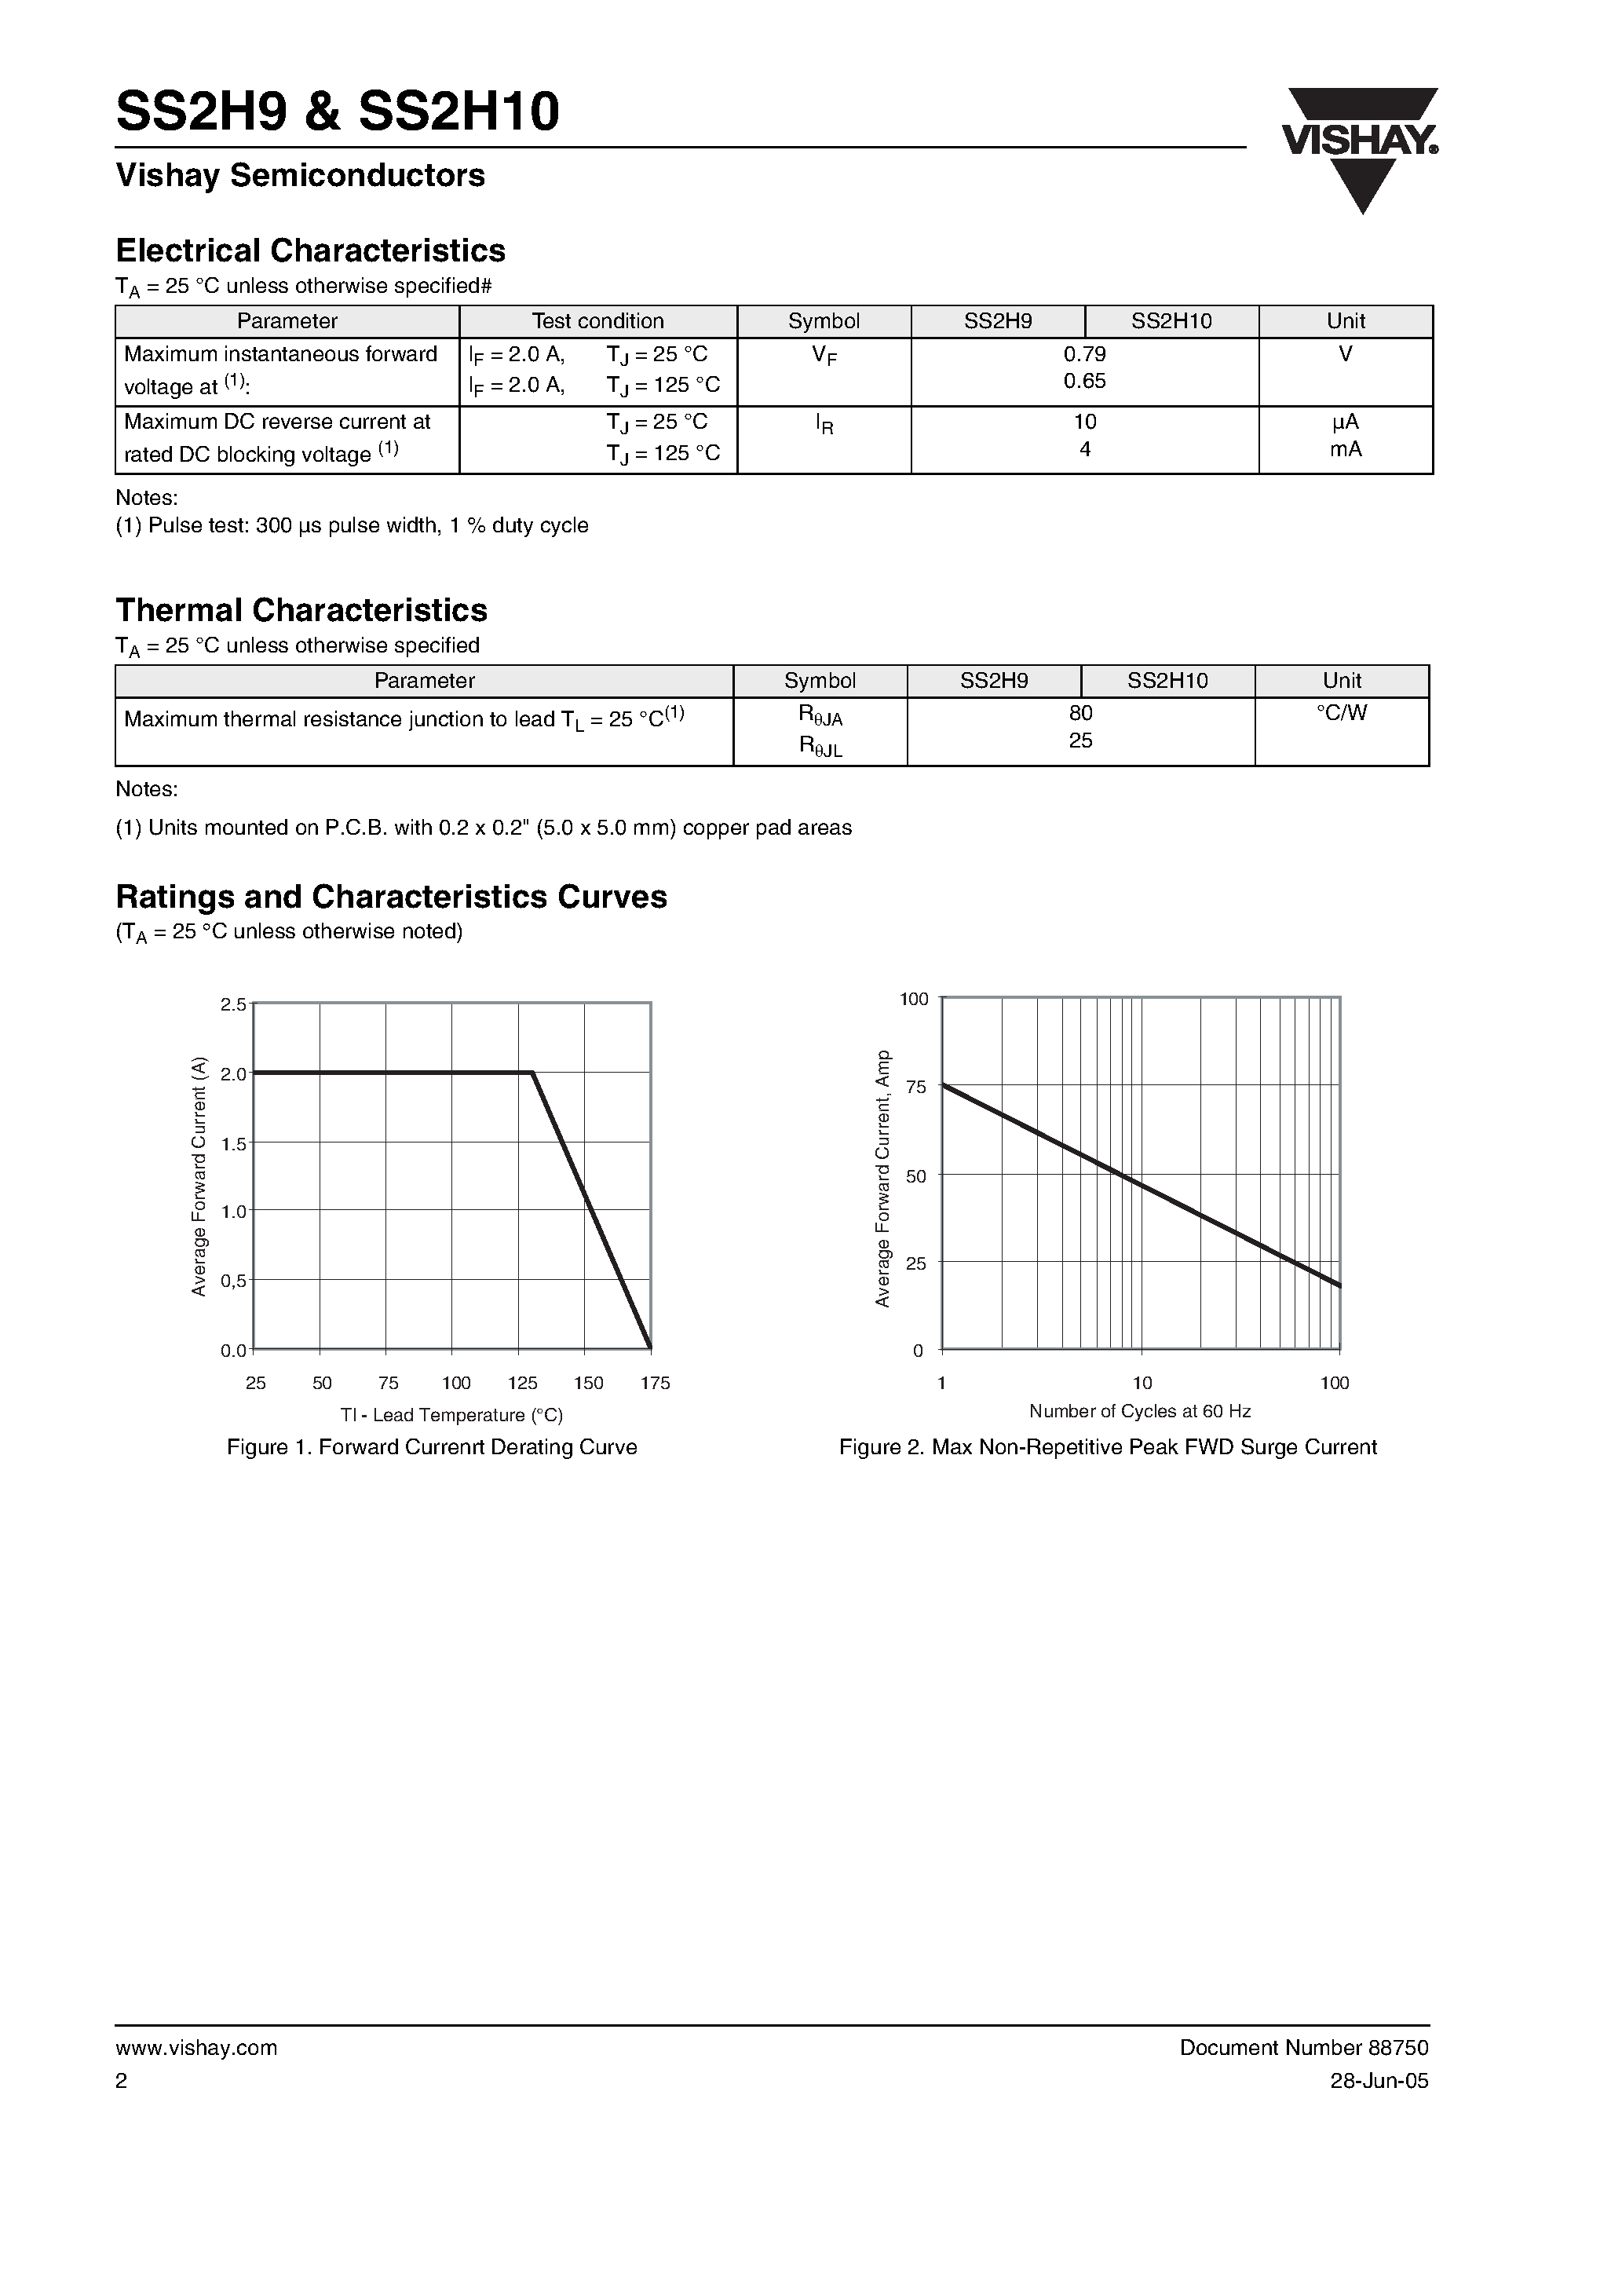 Datasheet SS2H10 - (SS2H9 / SS2H10) High-Voltage Surface Mount Schottky Rectifier page 2